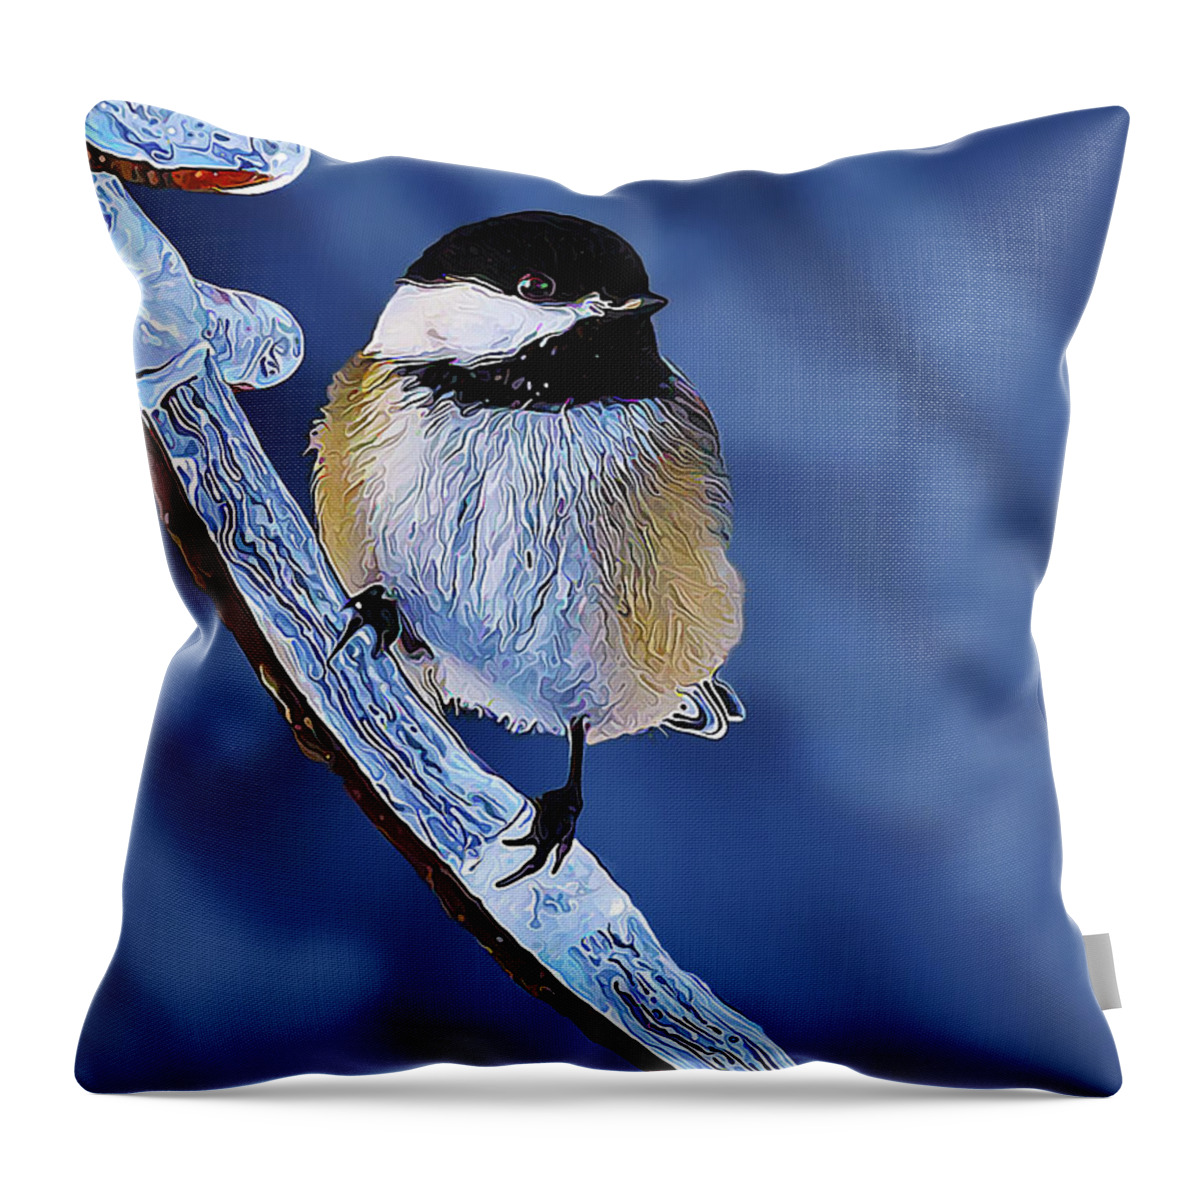 Beauty Of Nature Throw Pillow featuring the photograph Winter Chickadee by ABeautifulSky Photography by Bill Caldwell